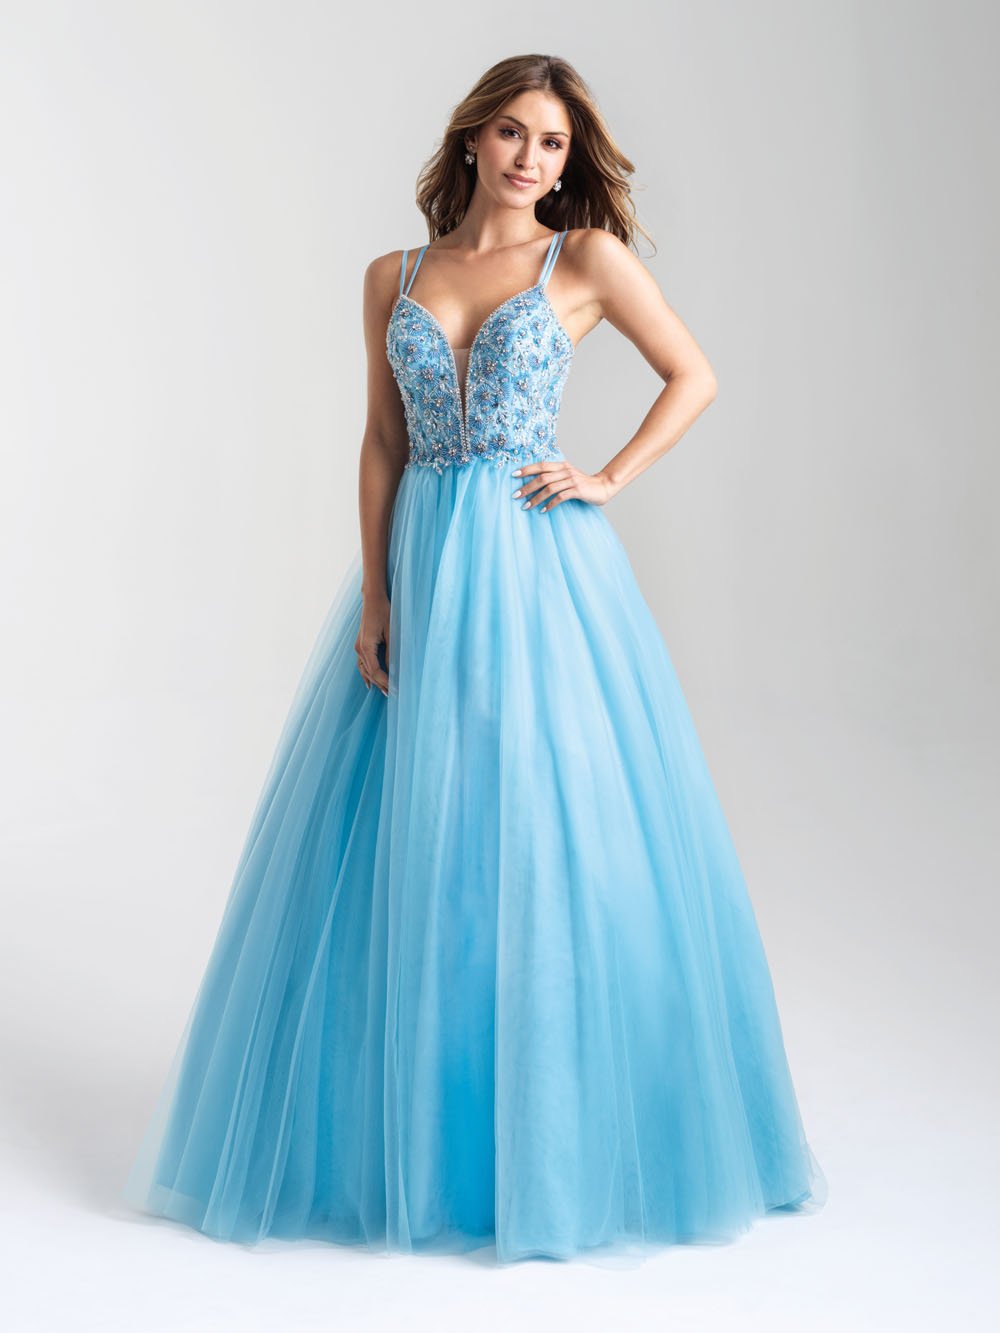 Madison James 20-388 dress images in these colors: Turquoise, Mauve .